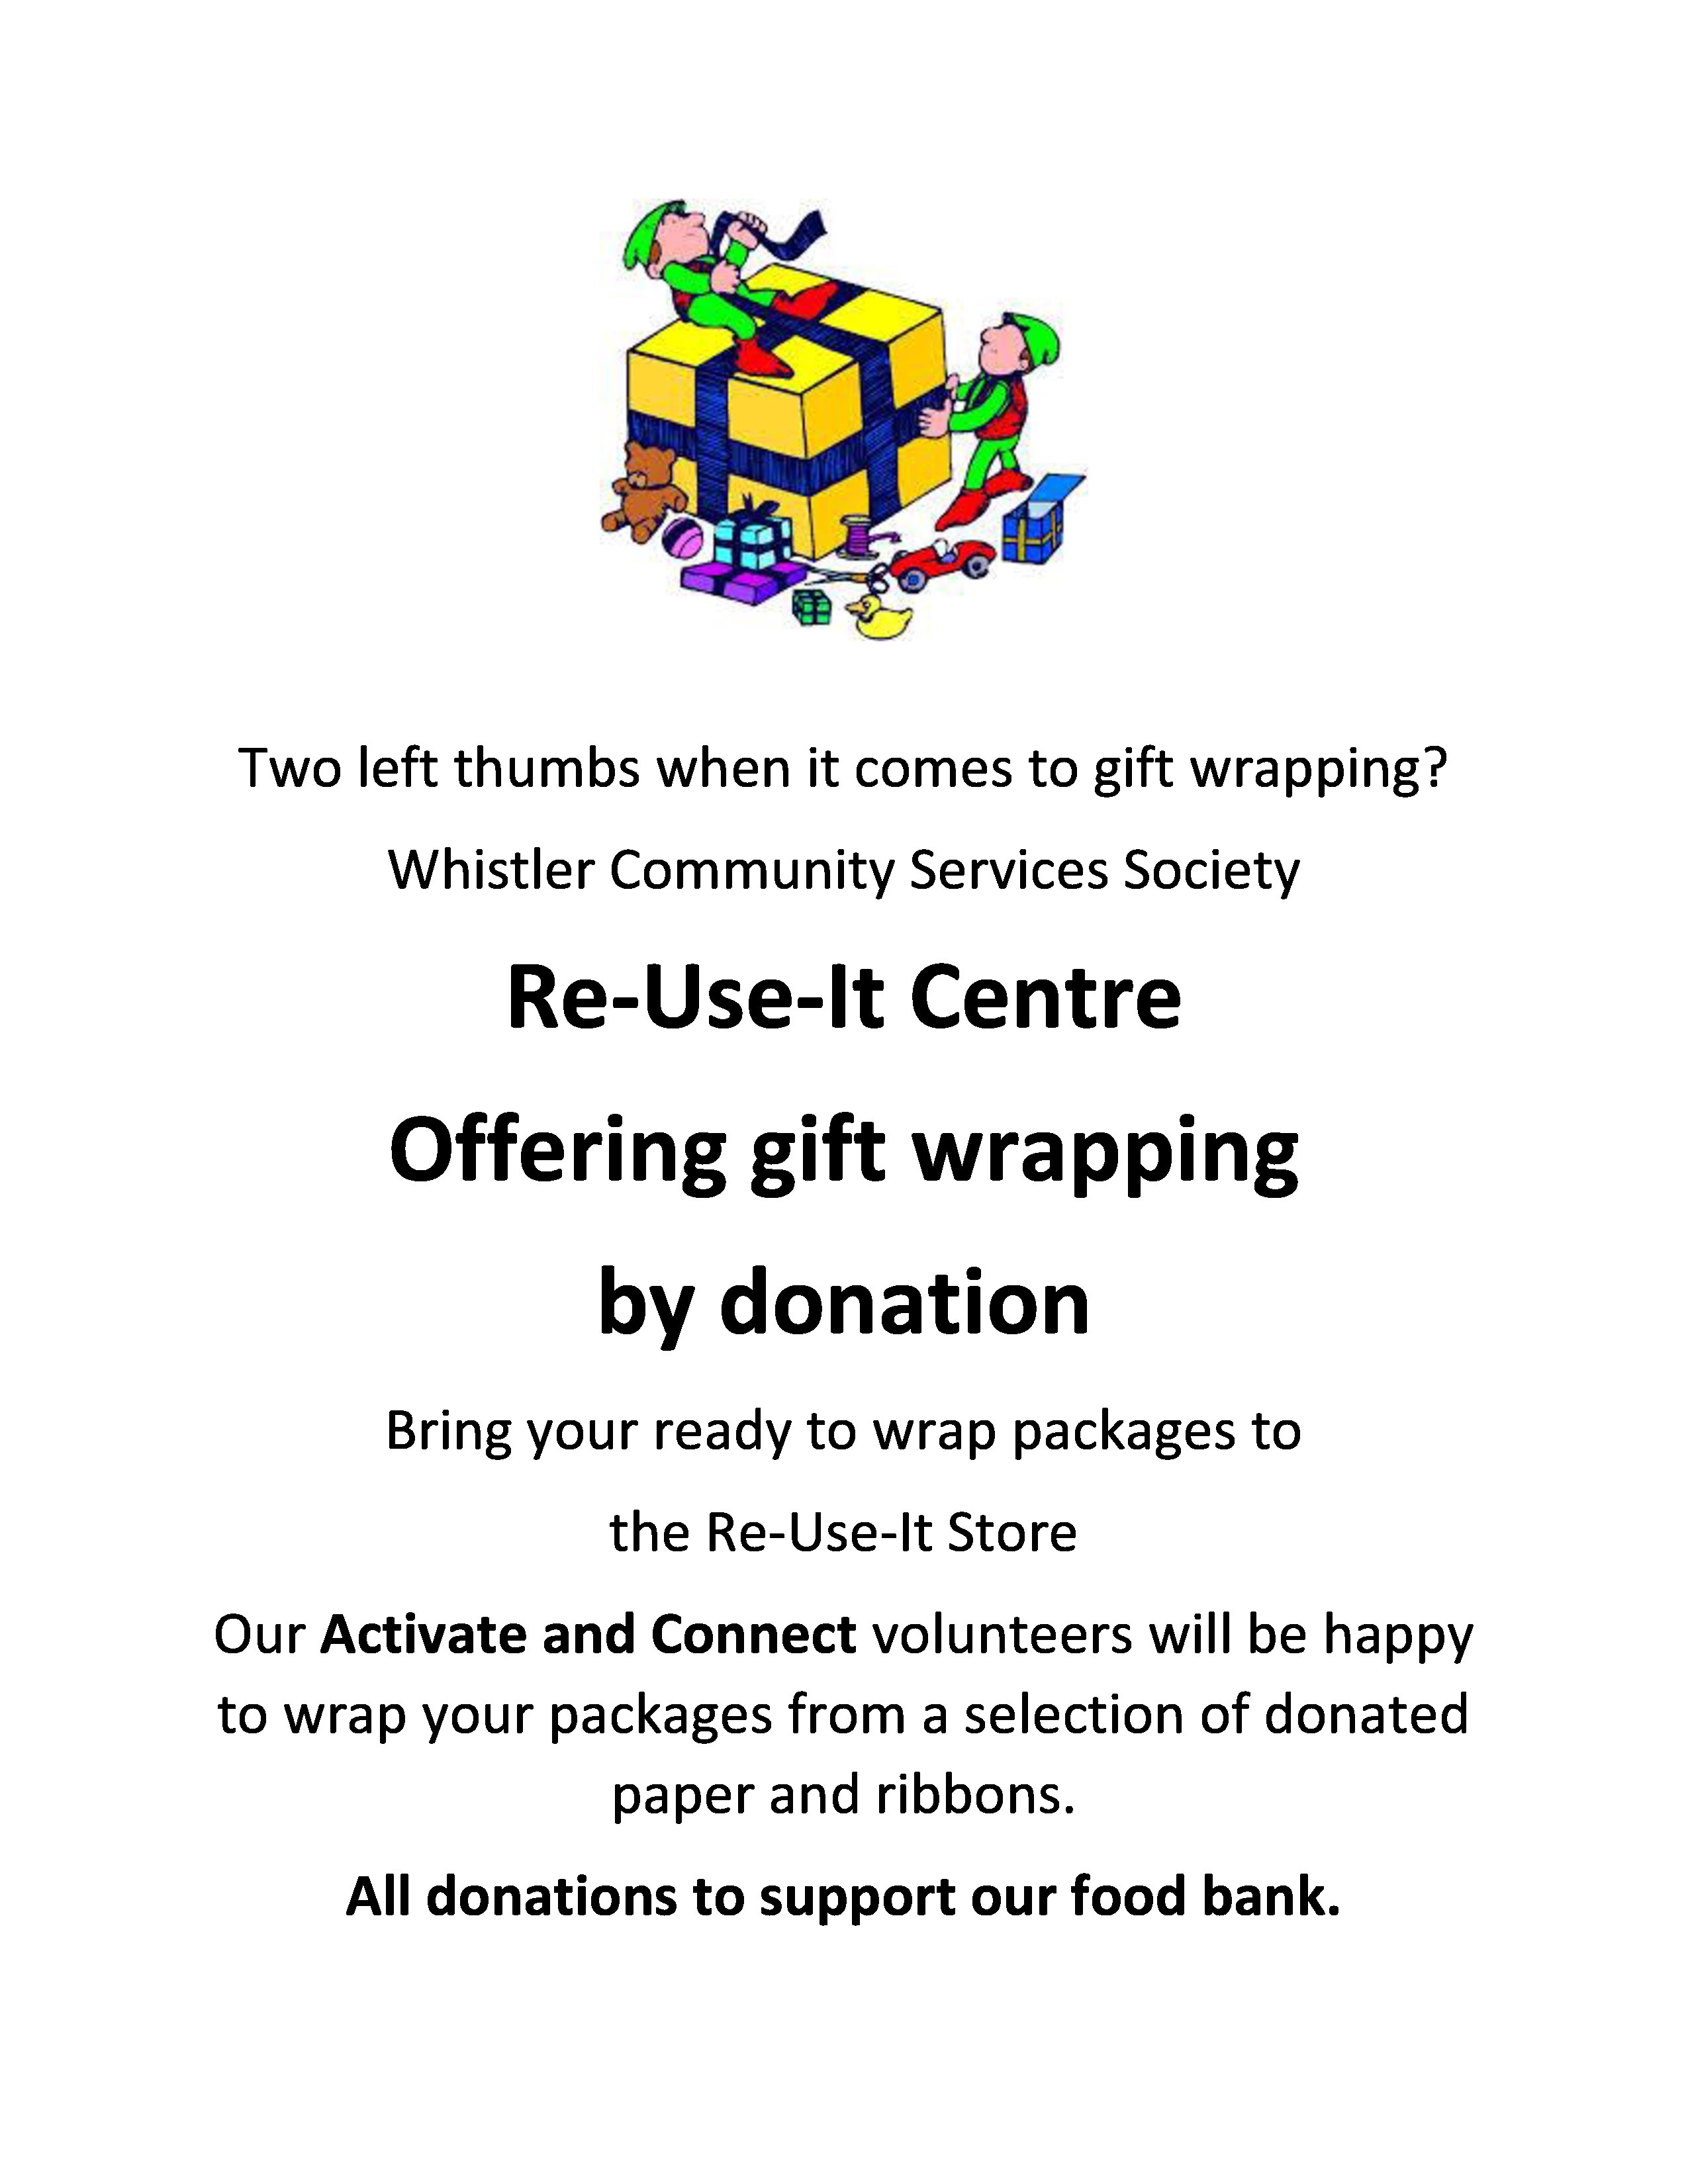 WCSS Gift Wrapping DEC2019